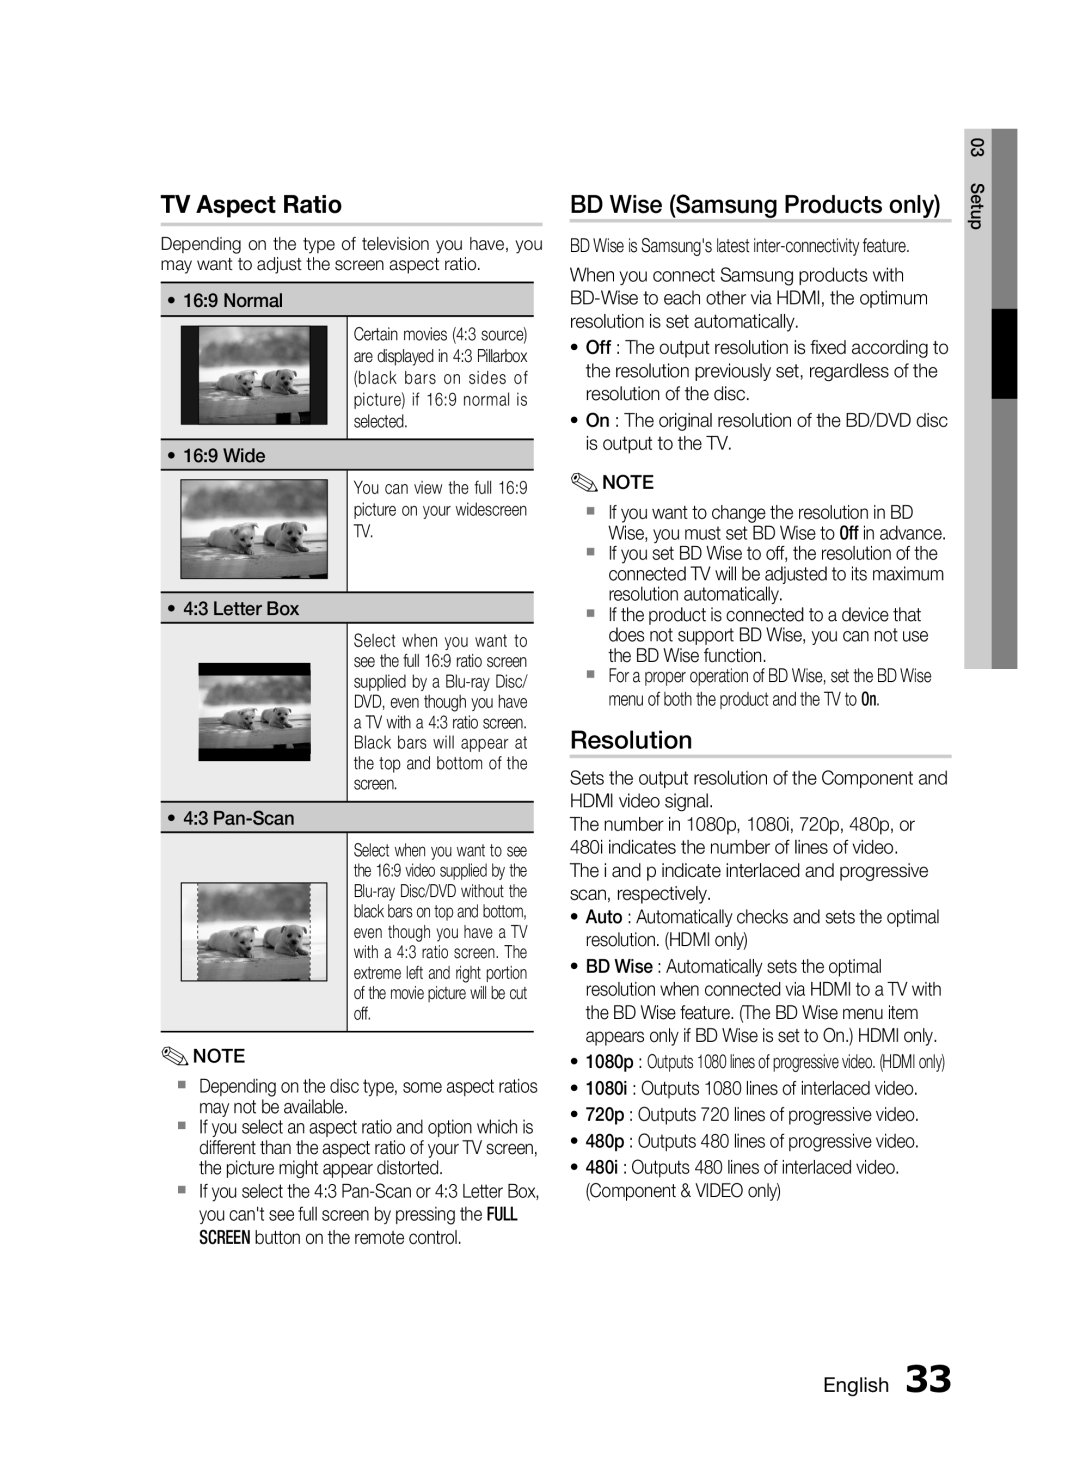 Samsung C6600 user manual TV Aspect Ratio, BD Wise Samsung Products only, Resolution, English 